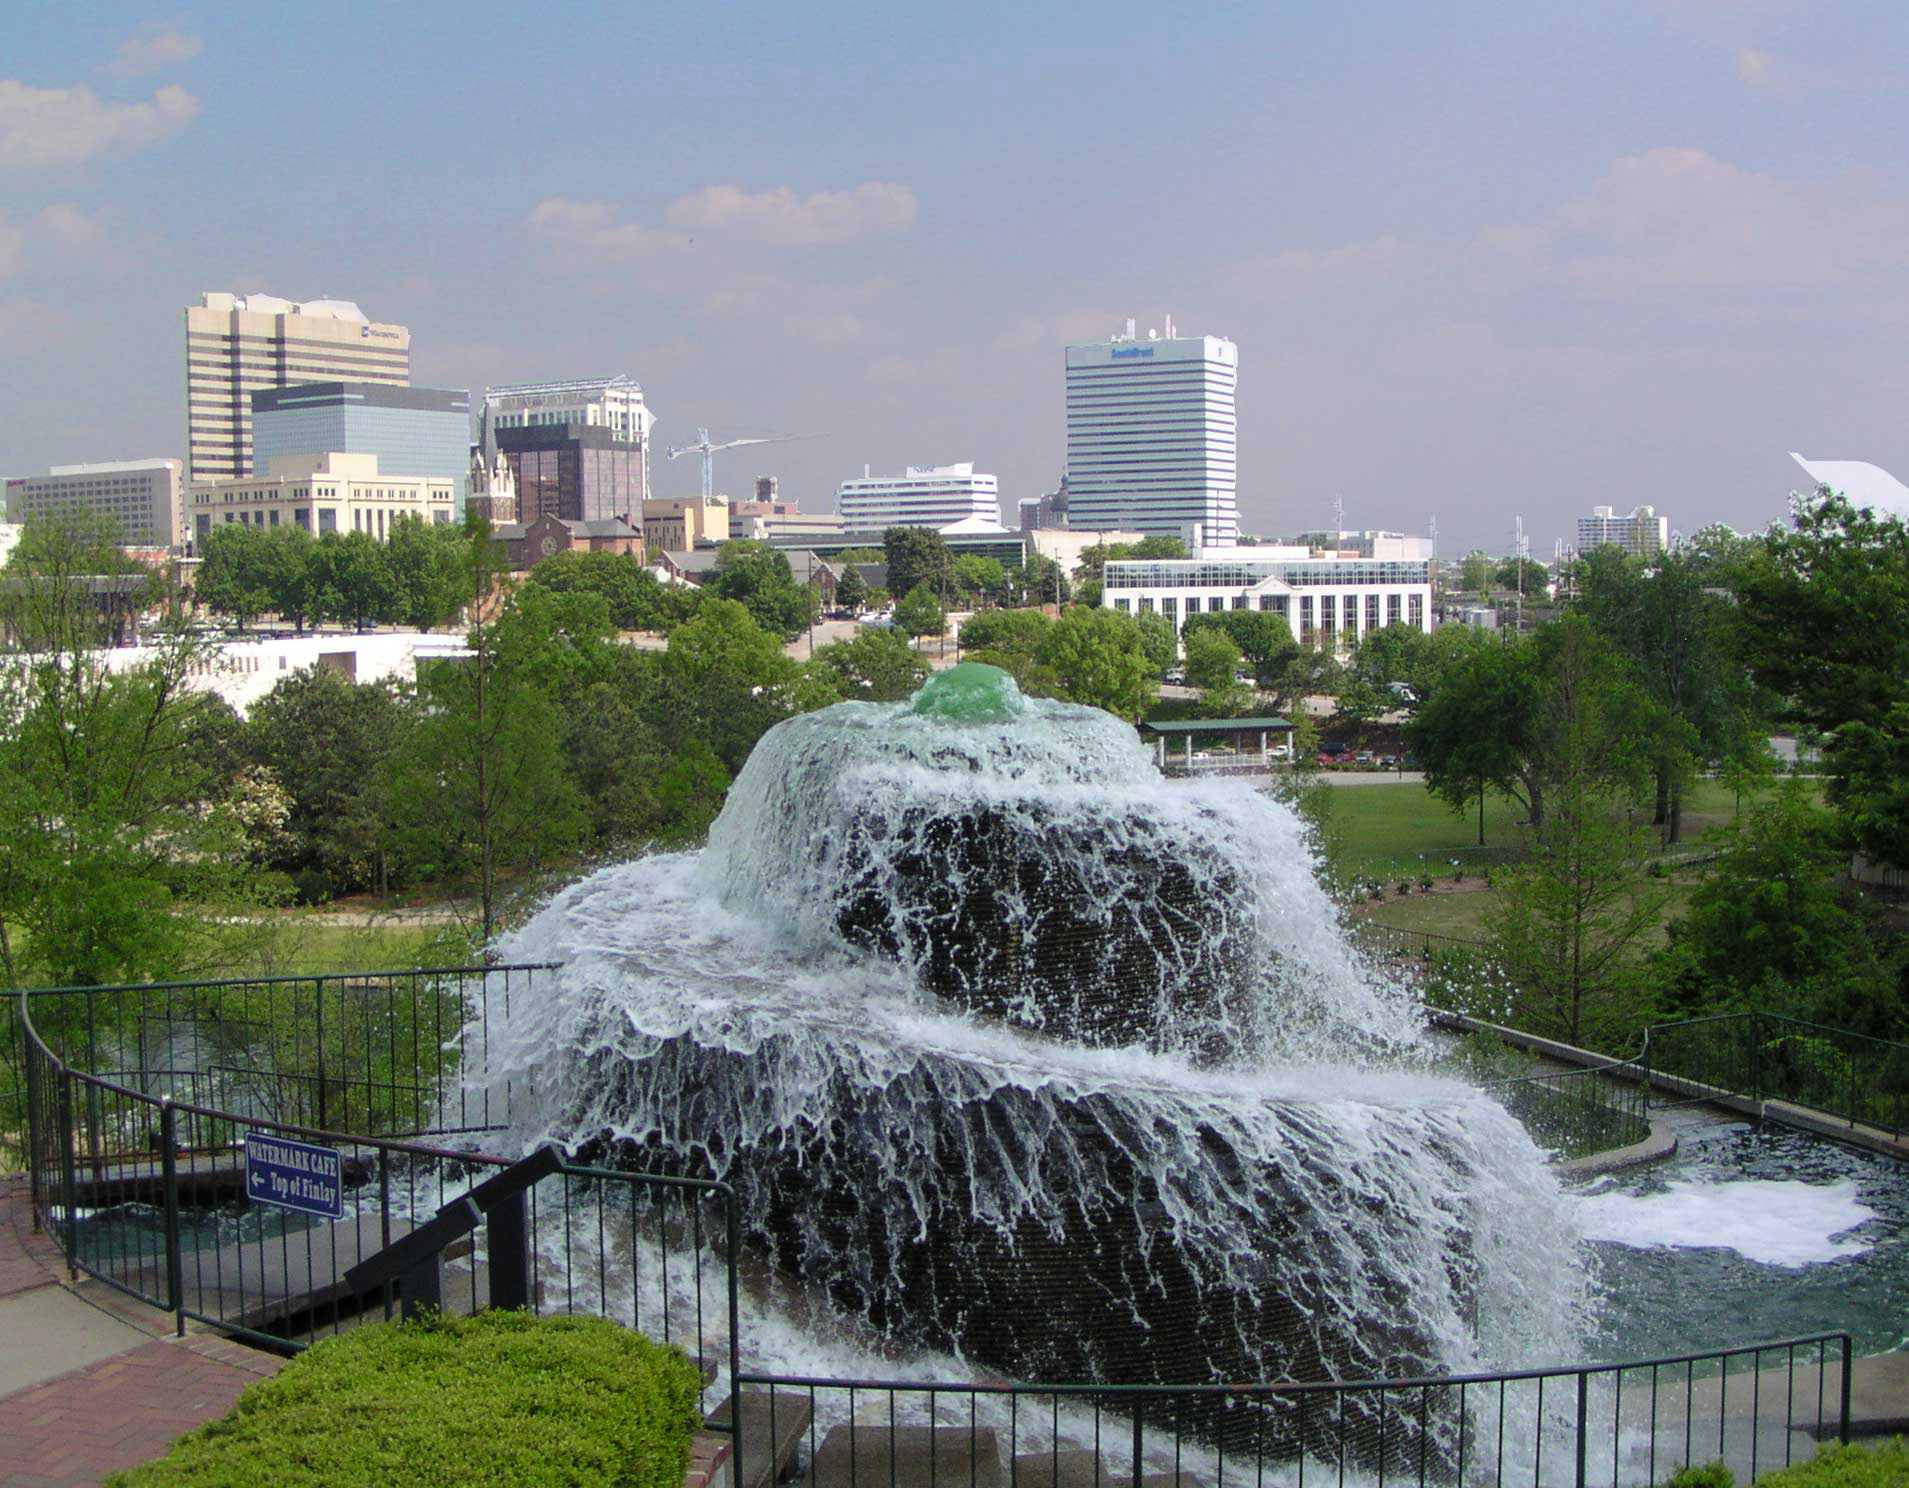 Finley Fountain And The City Of Columbia South Carolina Image Free 